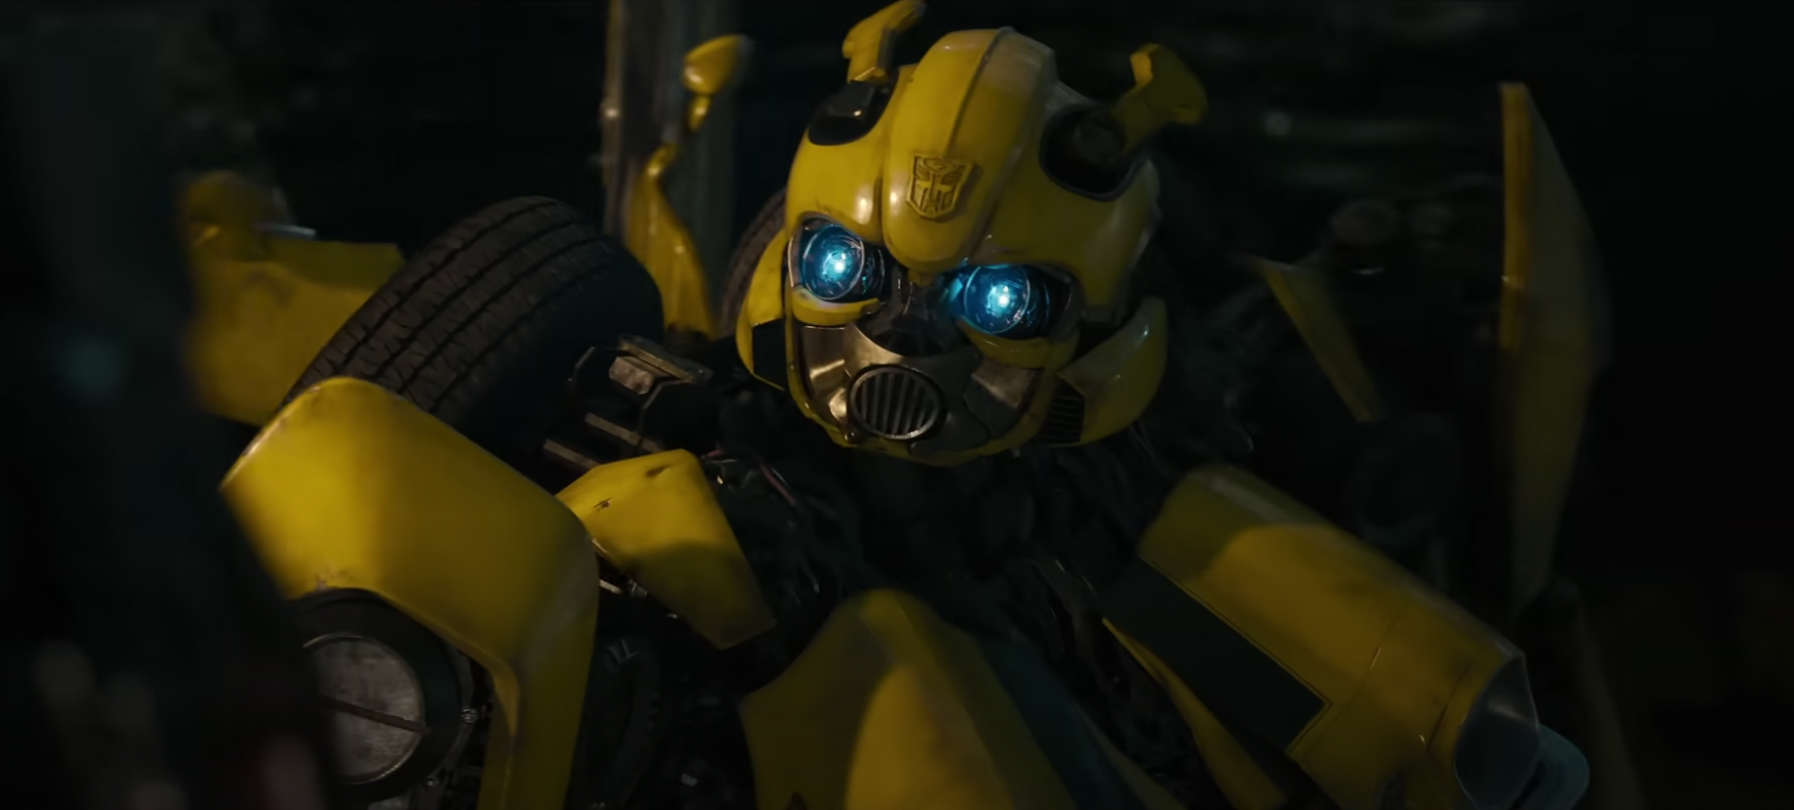 Transformers: Rise of the Beasts Outperforms Bumblebee in Thursday Box Office Previews